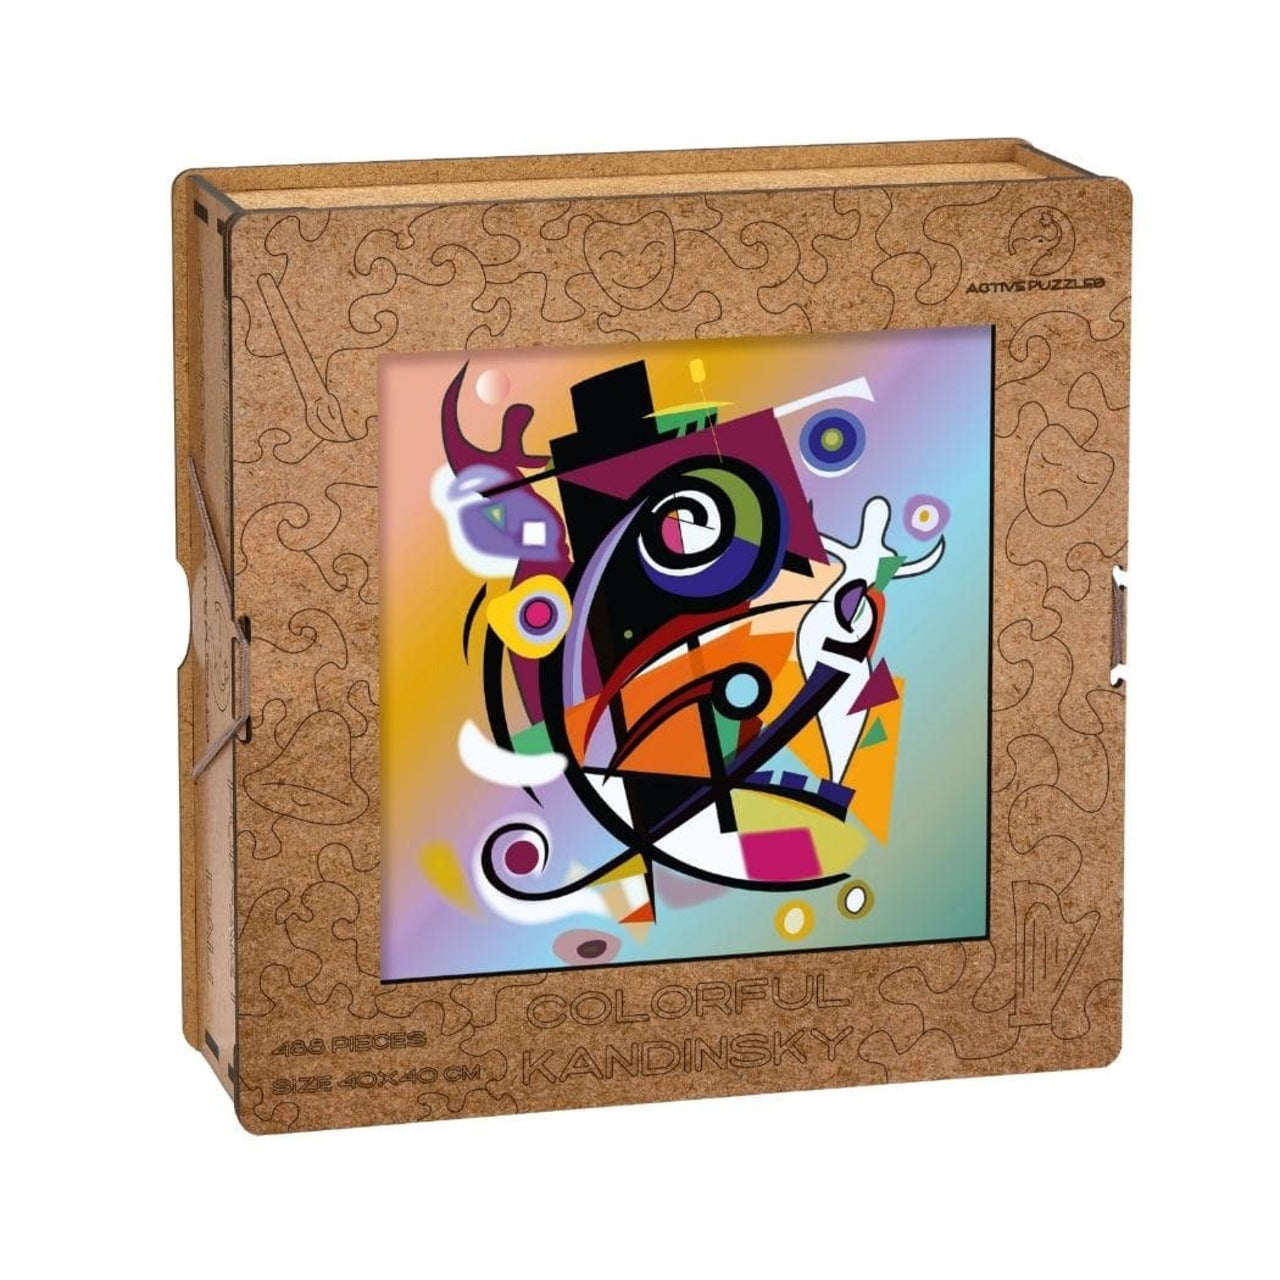 Buy Colorful Kandinsky Wooden Puzzle | 488 Pieces | Active Puzzles